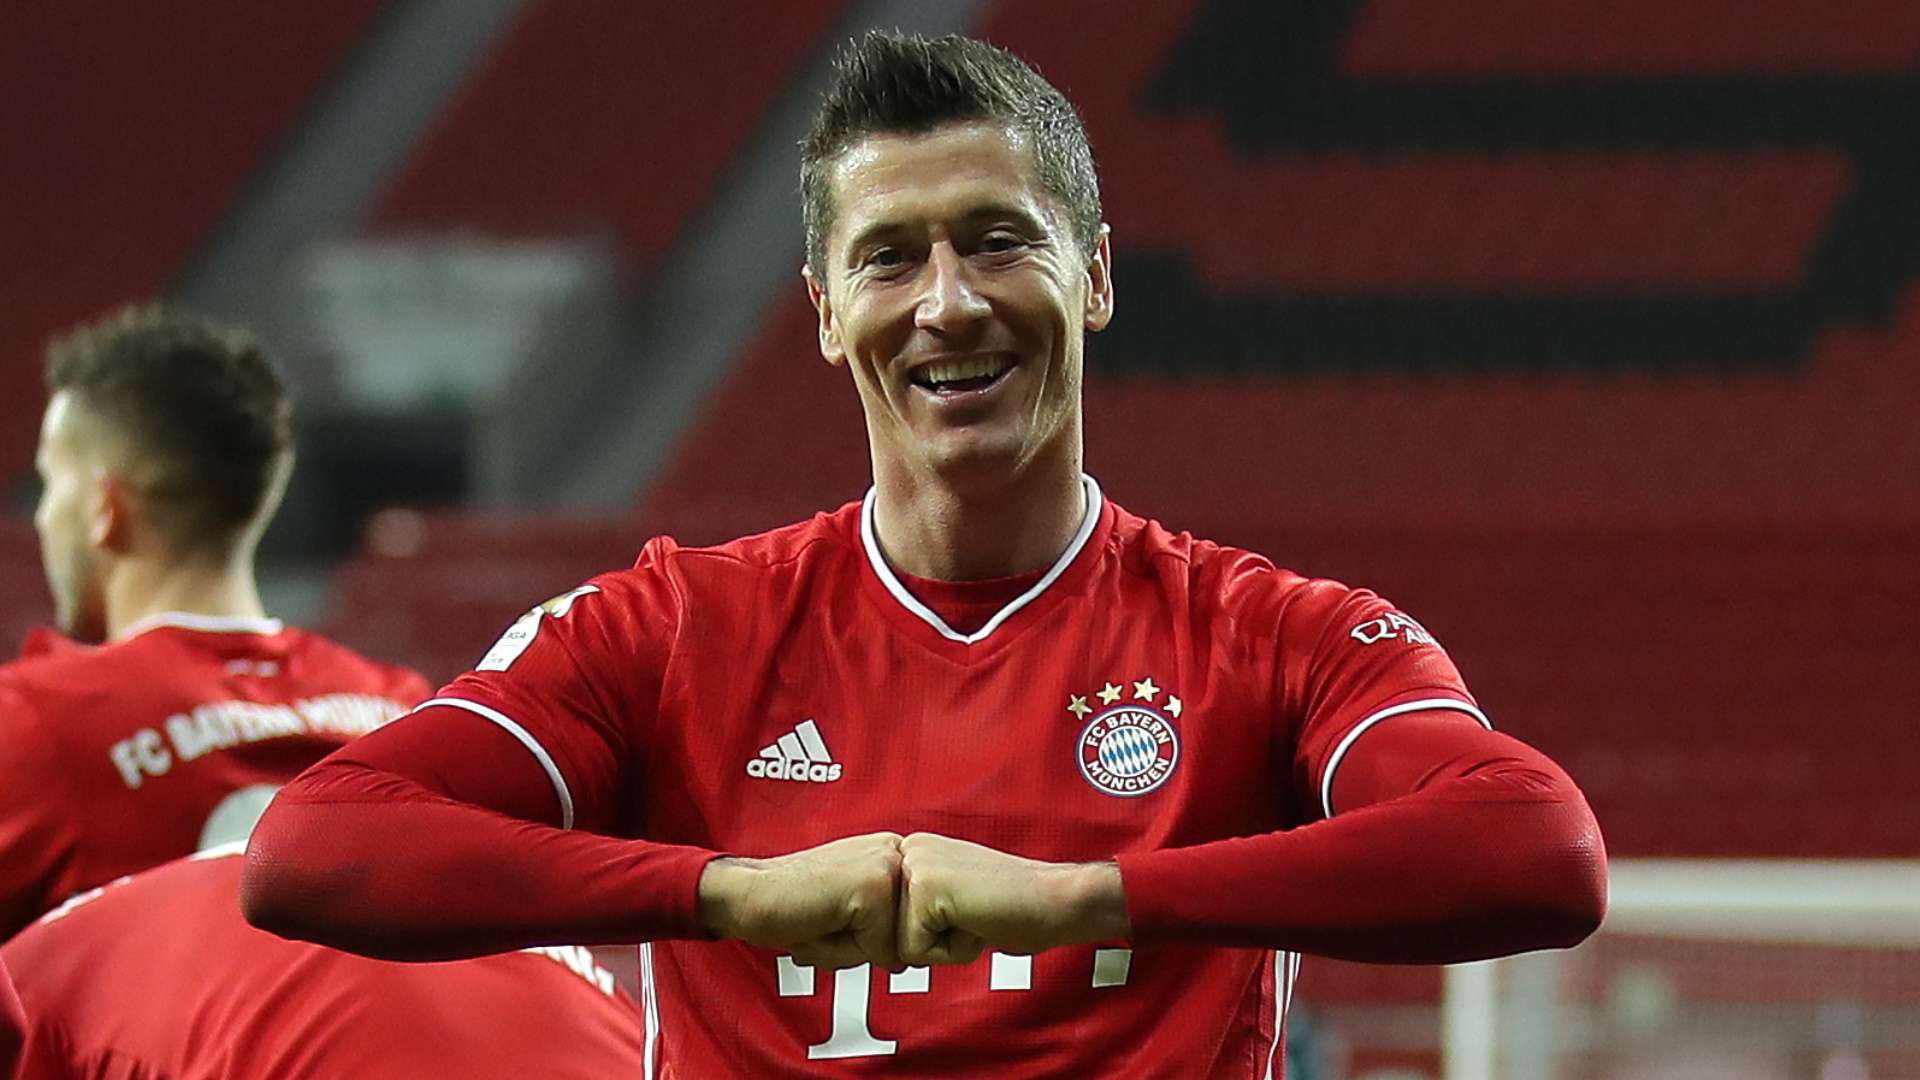 Bayern Munich star Lewandowski plans to play 'for at least another five years'